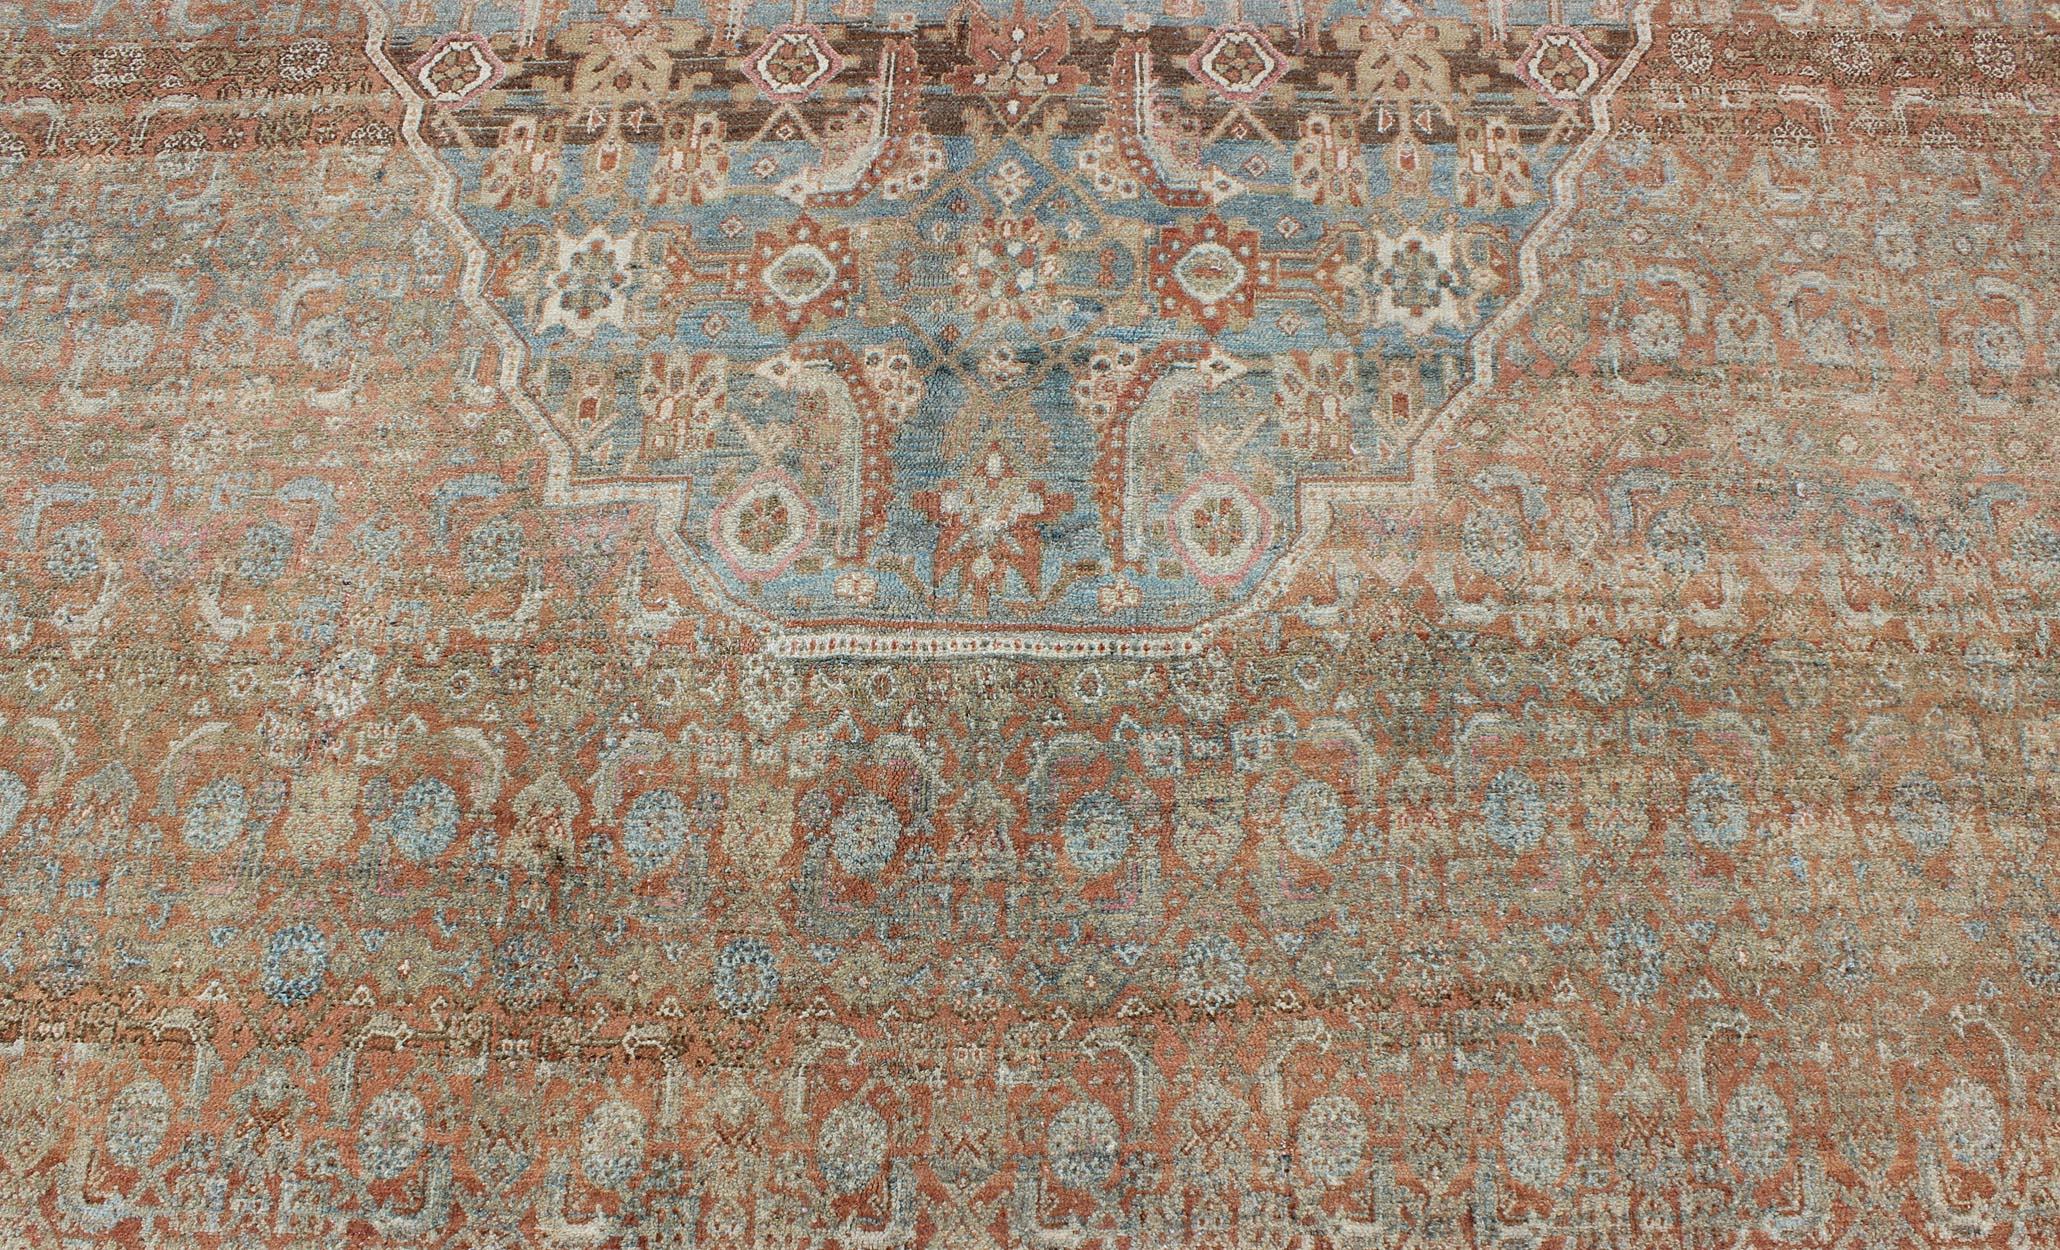 Early 20th Century Large Antique Persian Bibikabad Rug in Light Blue Background  For Sale 1